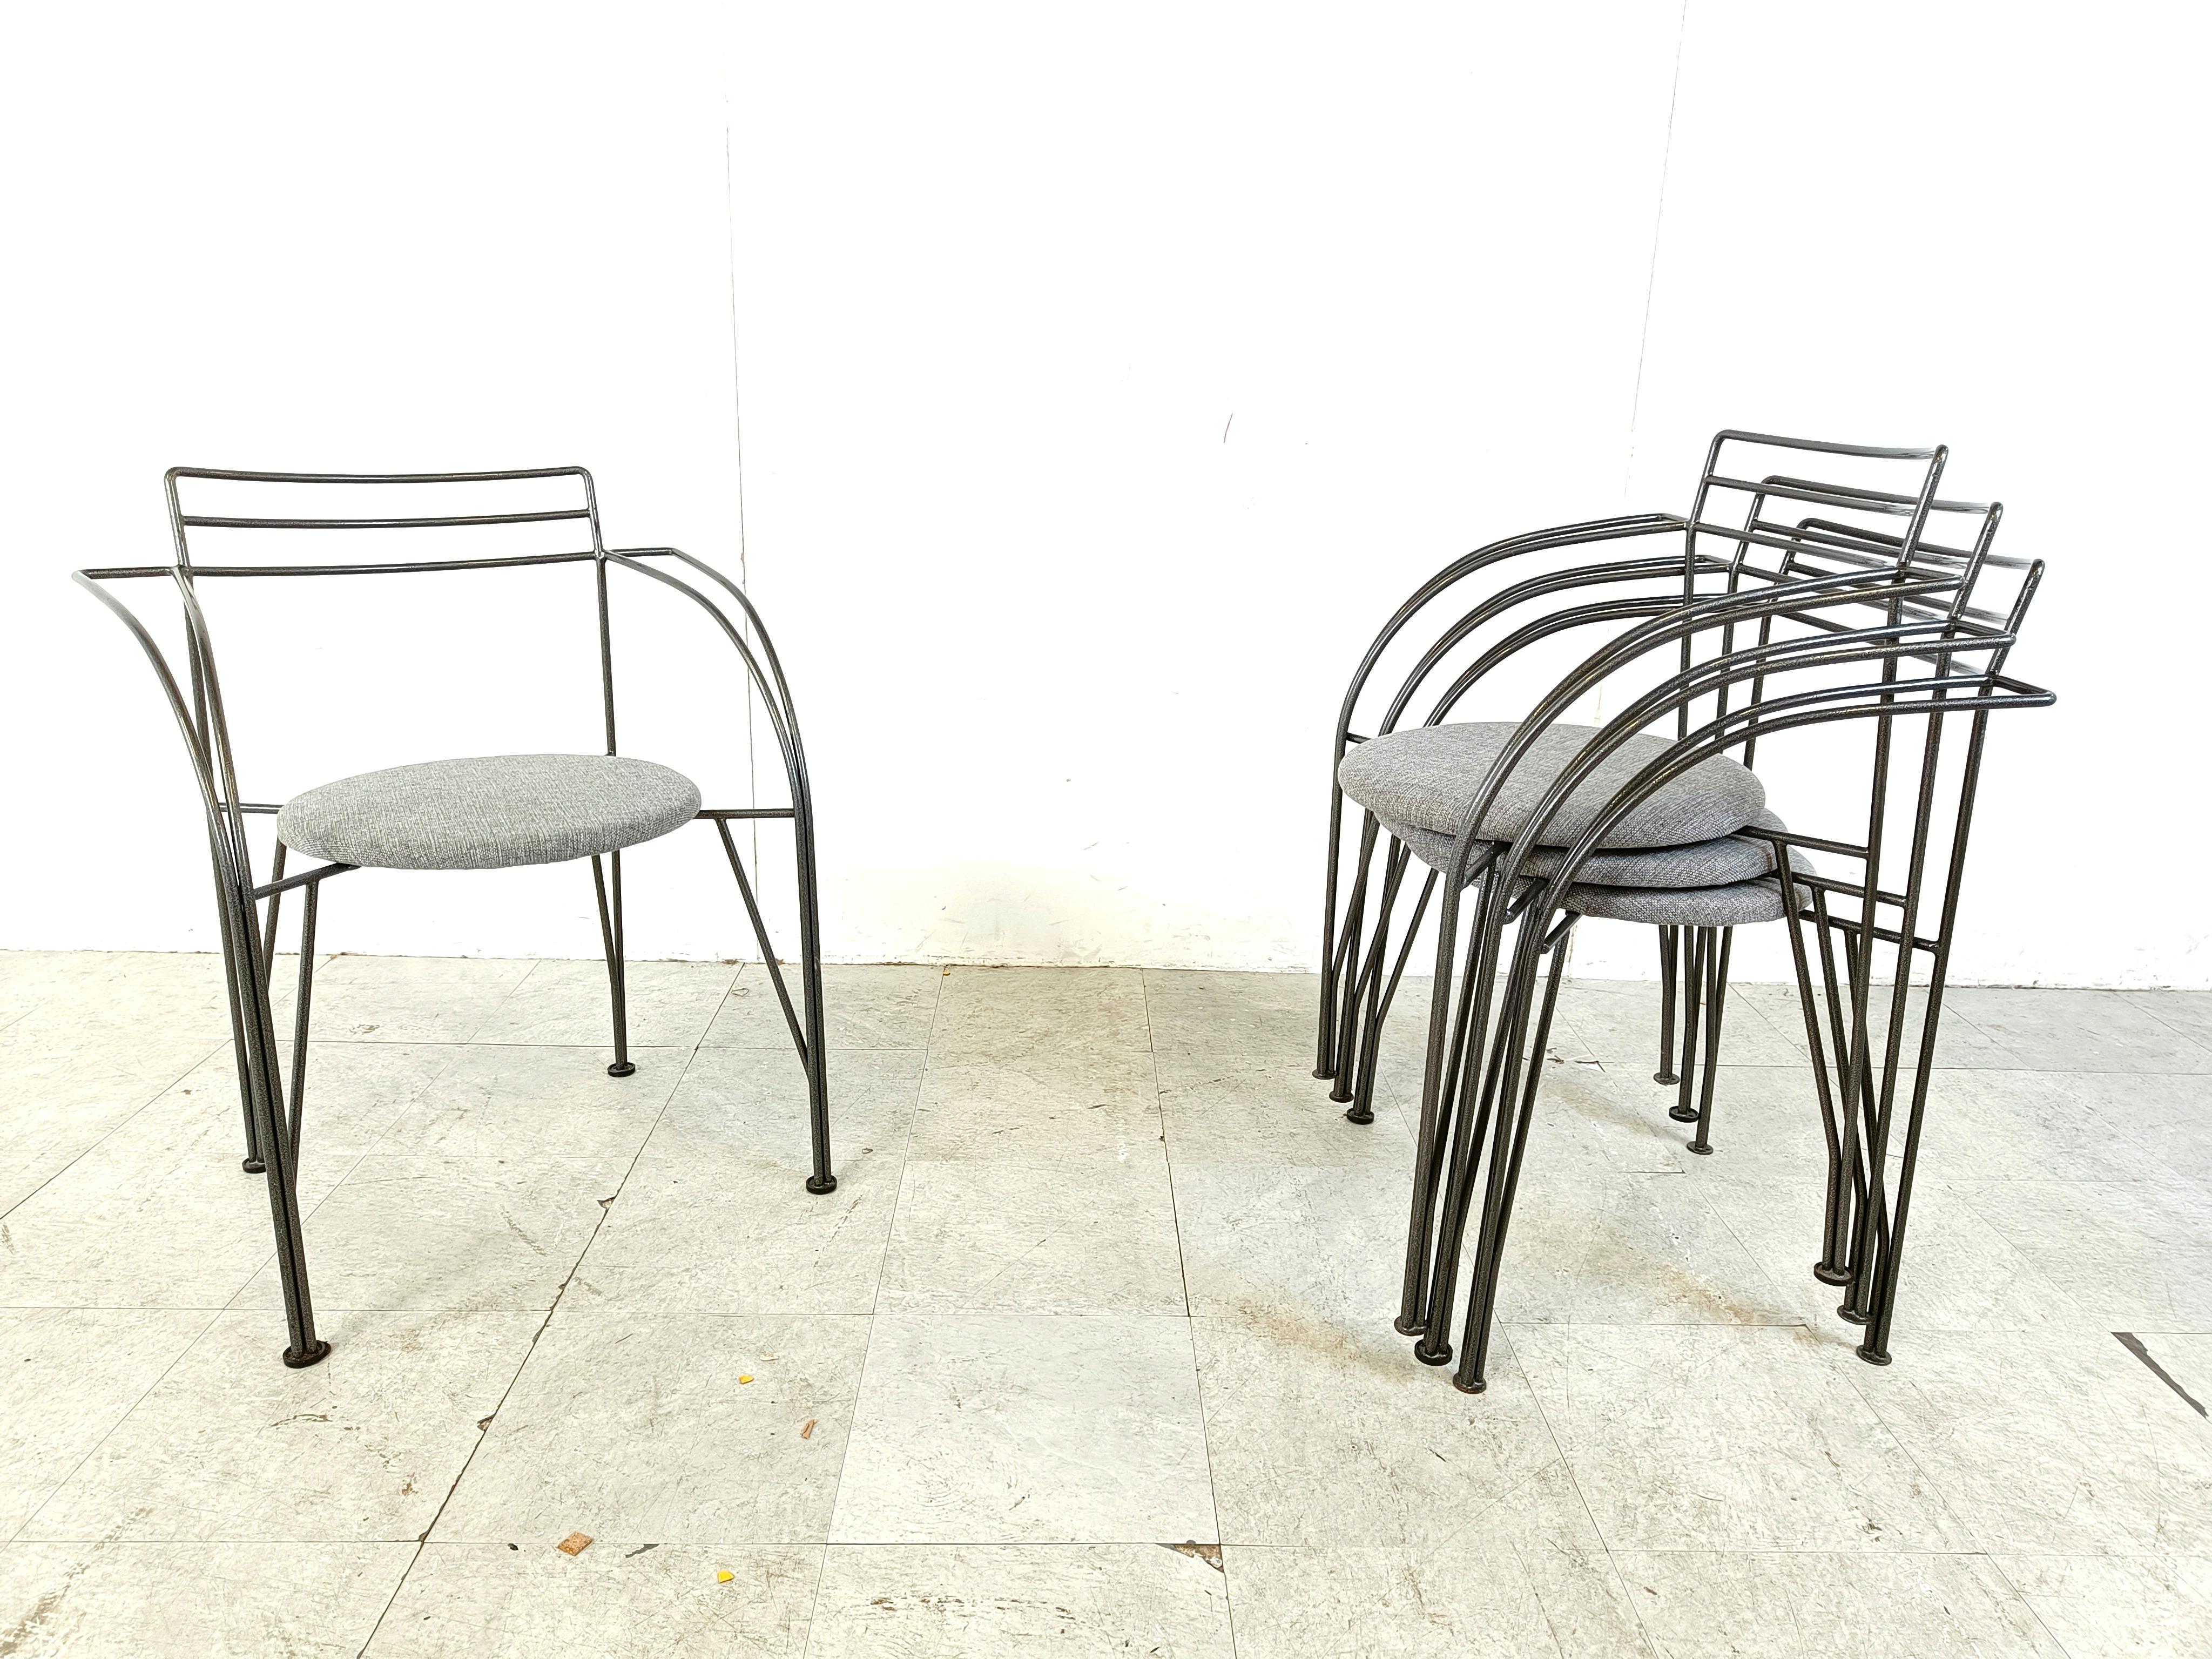 Set of 4 postmodern italian dining chairs with armrests.

Made out of grey metal frames and grey fabric seats.

Gorgeous timeless design.

Good condition

The chairs are stackable

1980s - Italy

Dimensions:
Height: 75cm/29.52